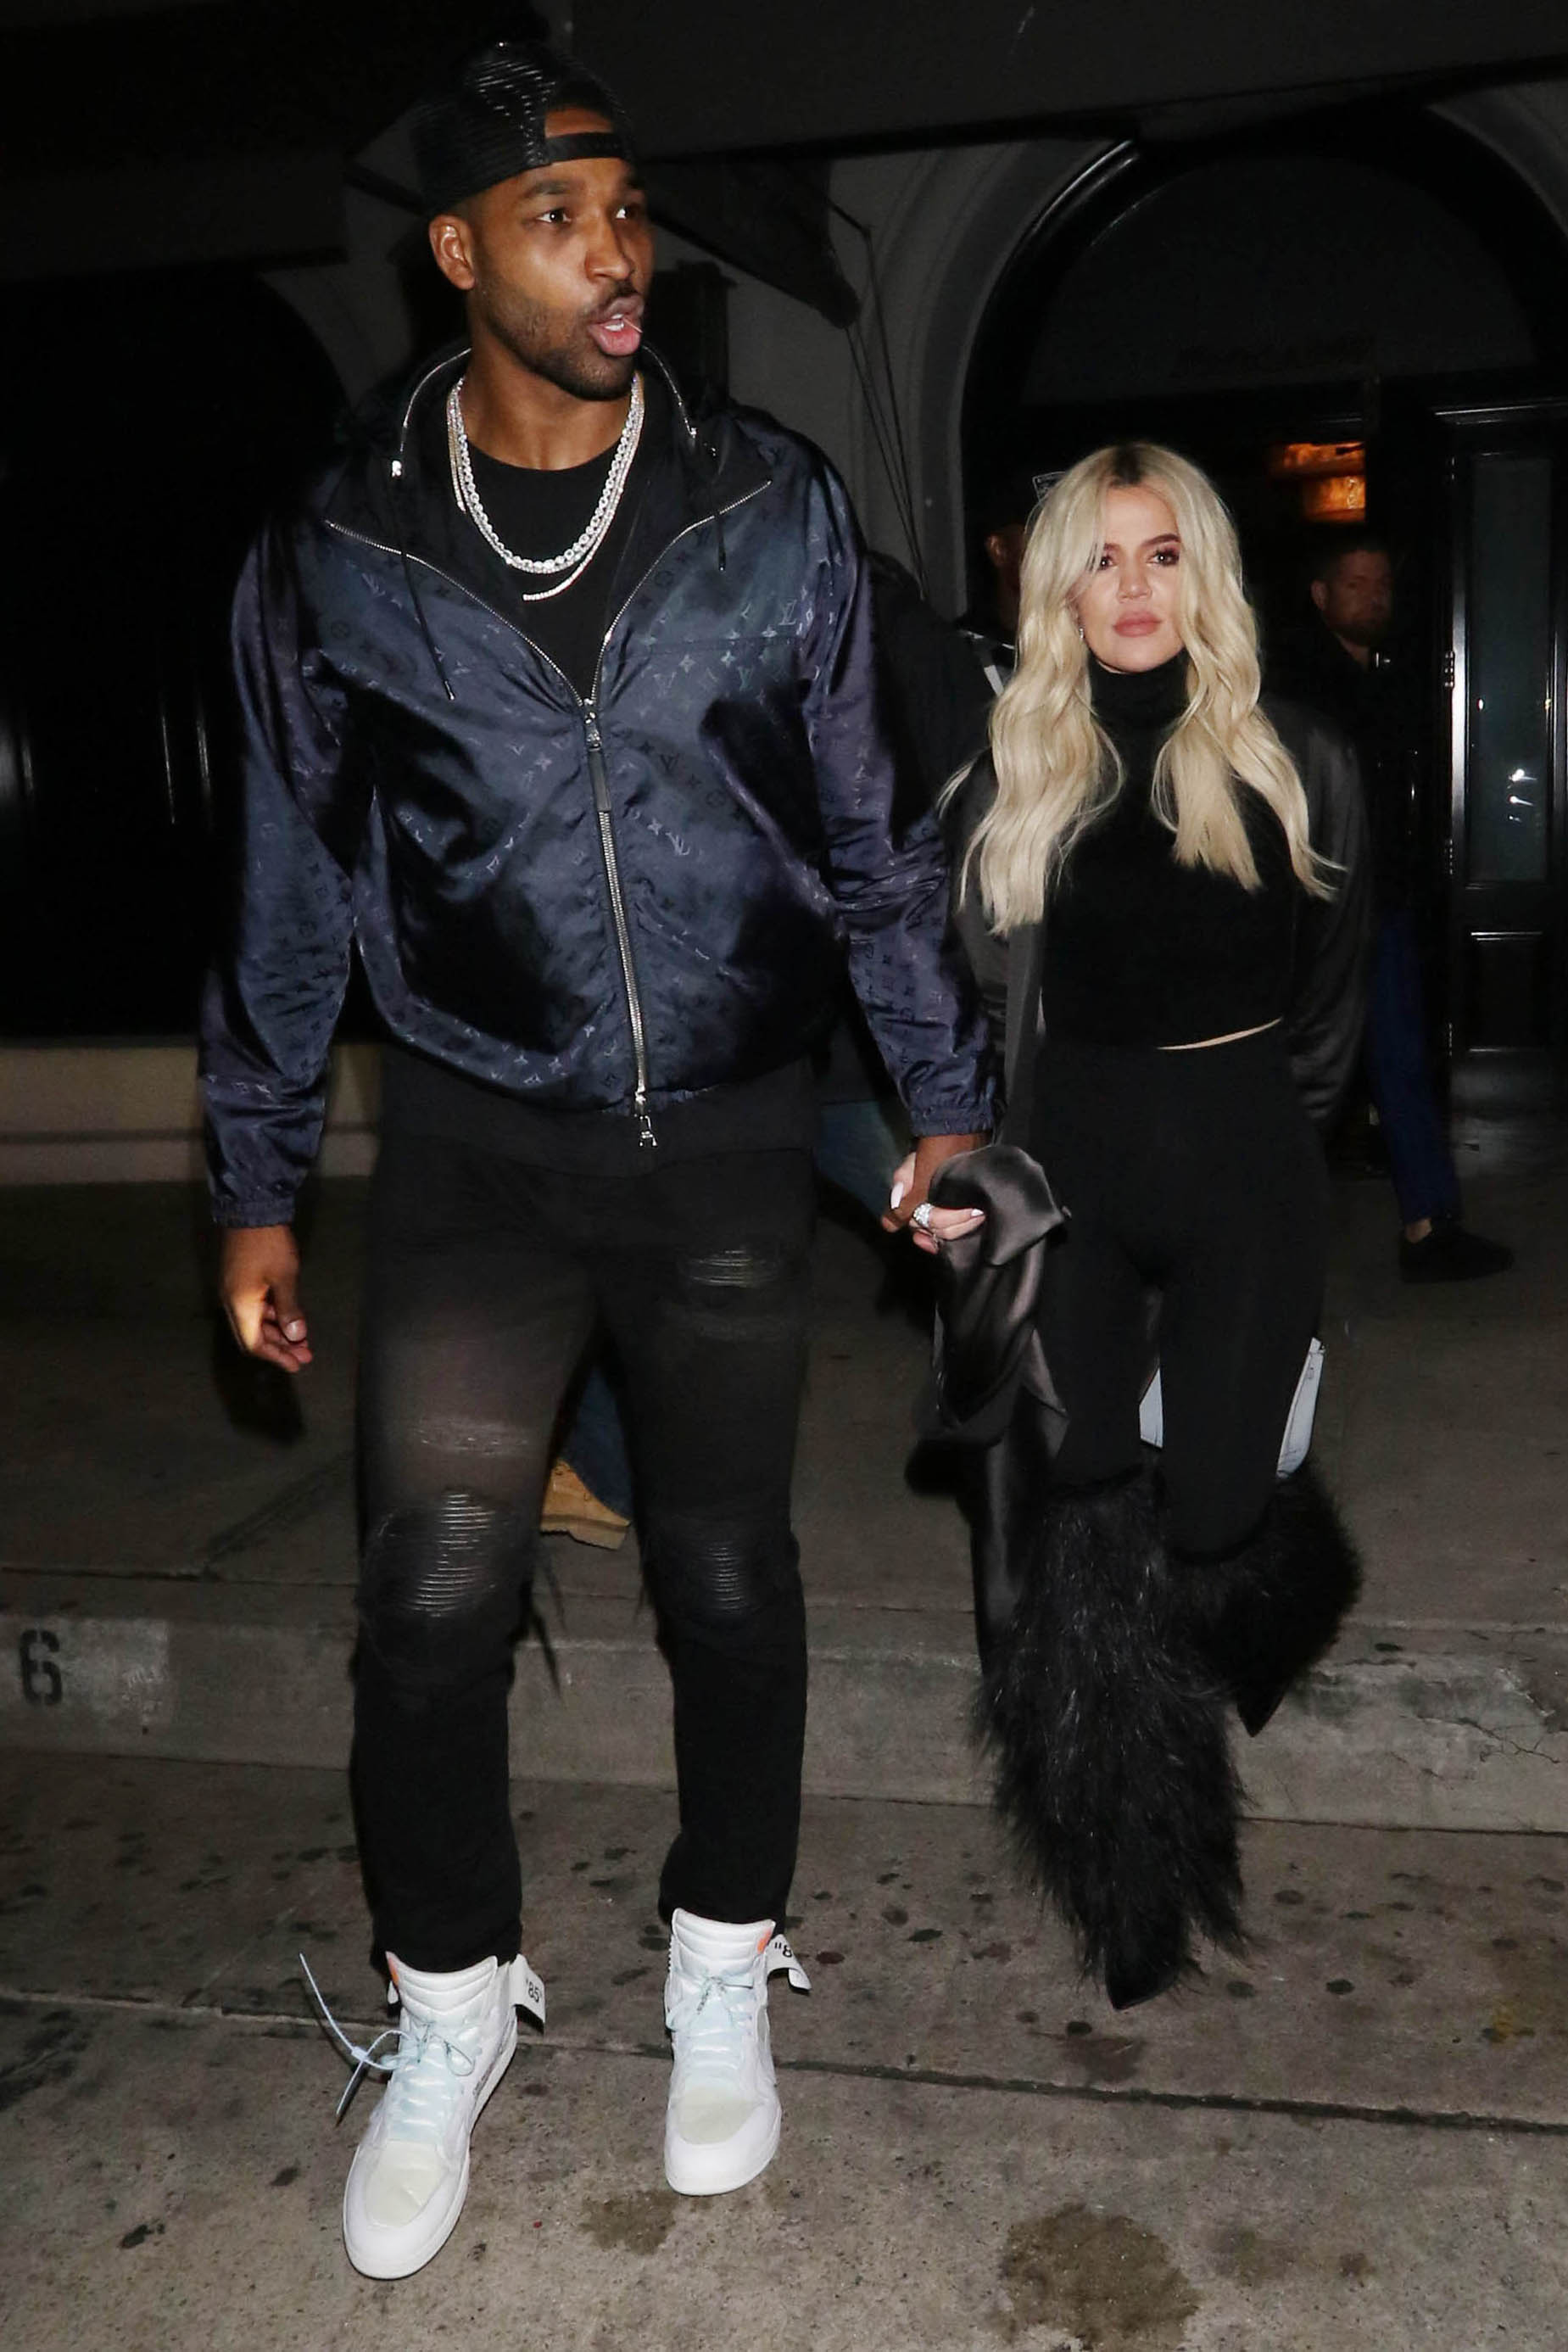 The NBA player is behind on child payments for his son, whom he welcomed but has never met while exclusively dating Khloe last year